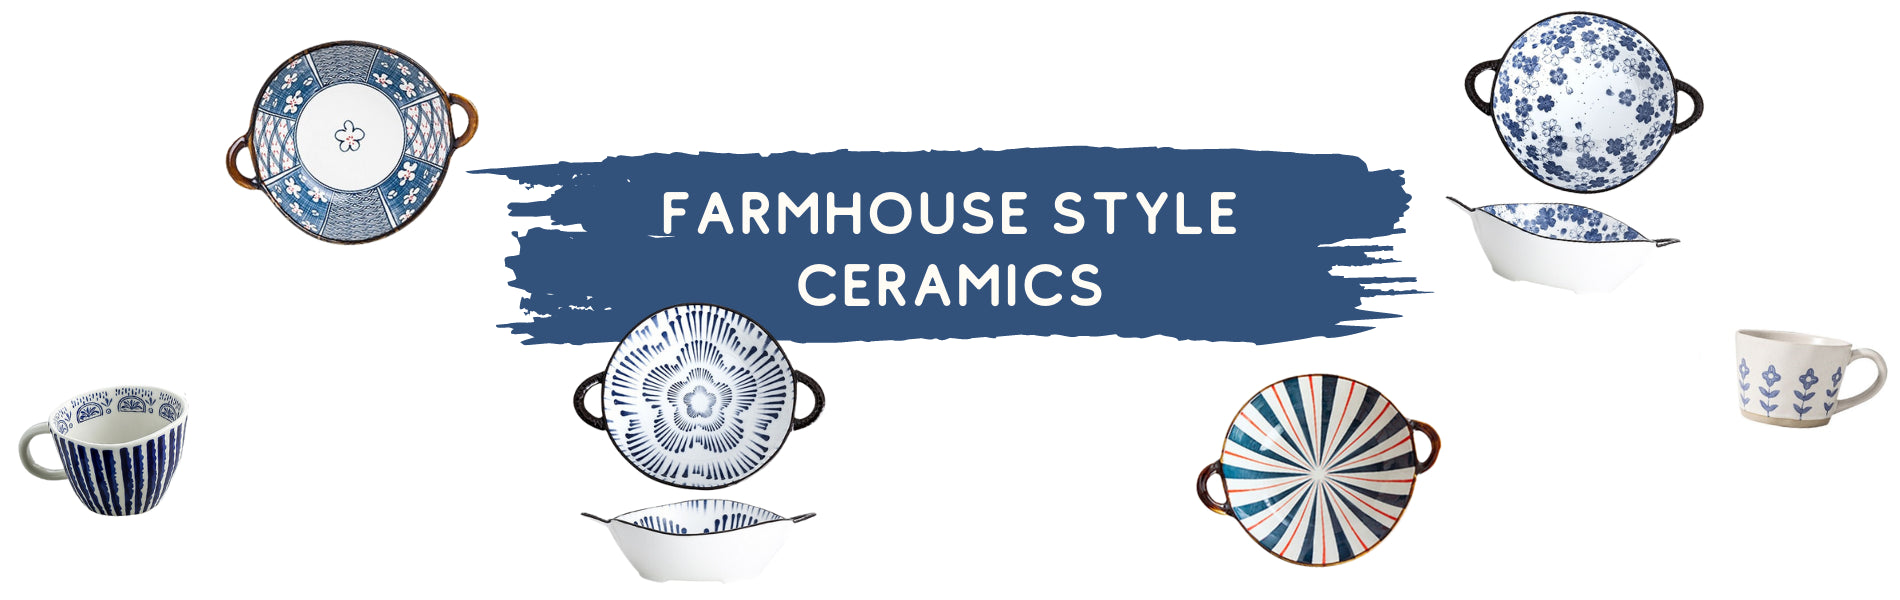 Farmhouse Style Blue and White Aesthetic Ceramics With White China Porcelain From Terra Powders Home Goods 